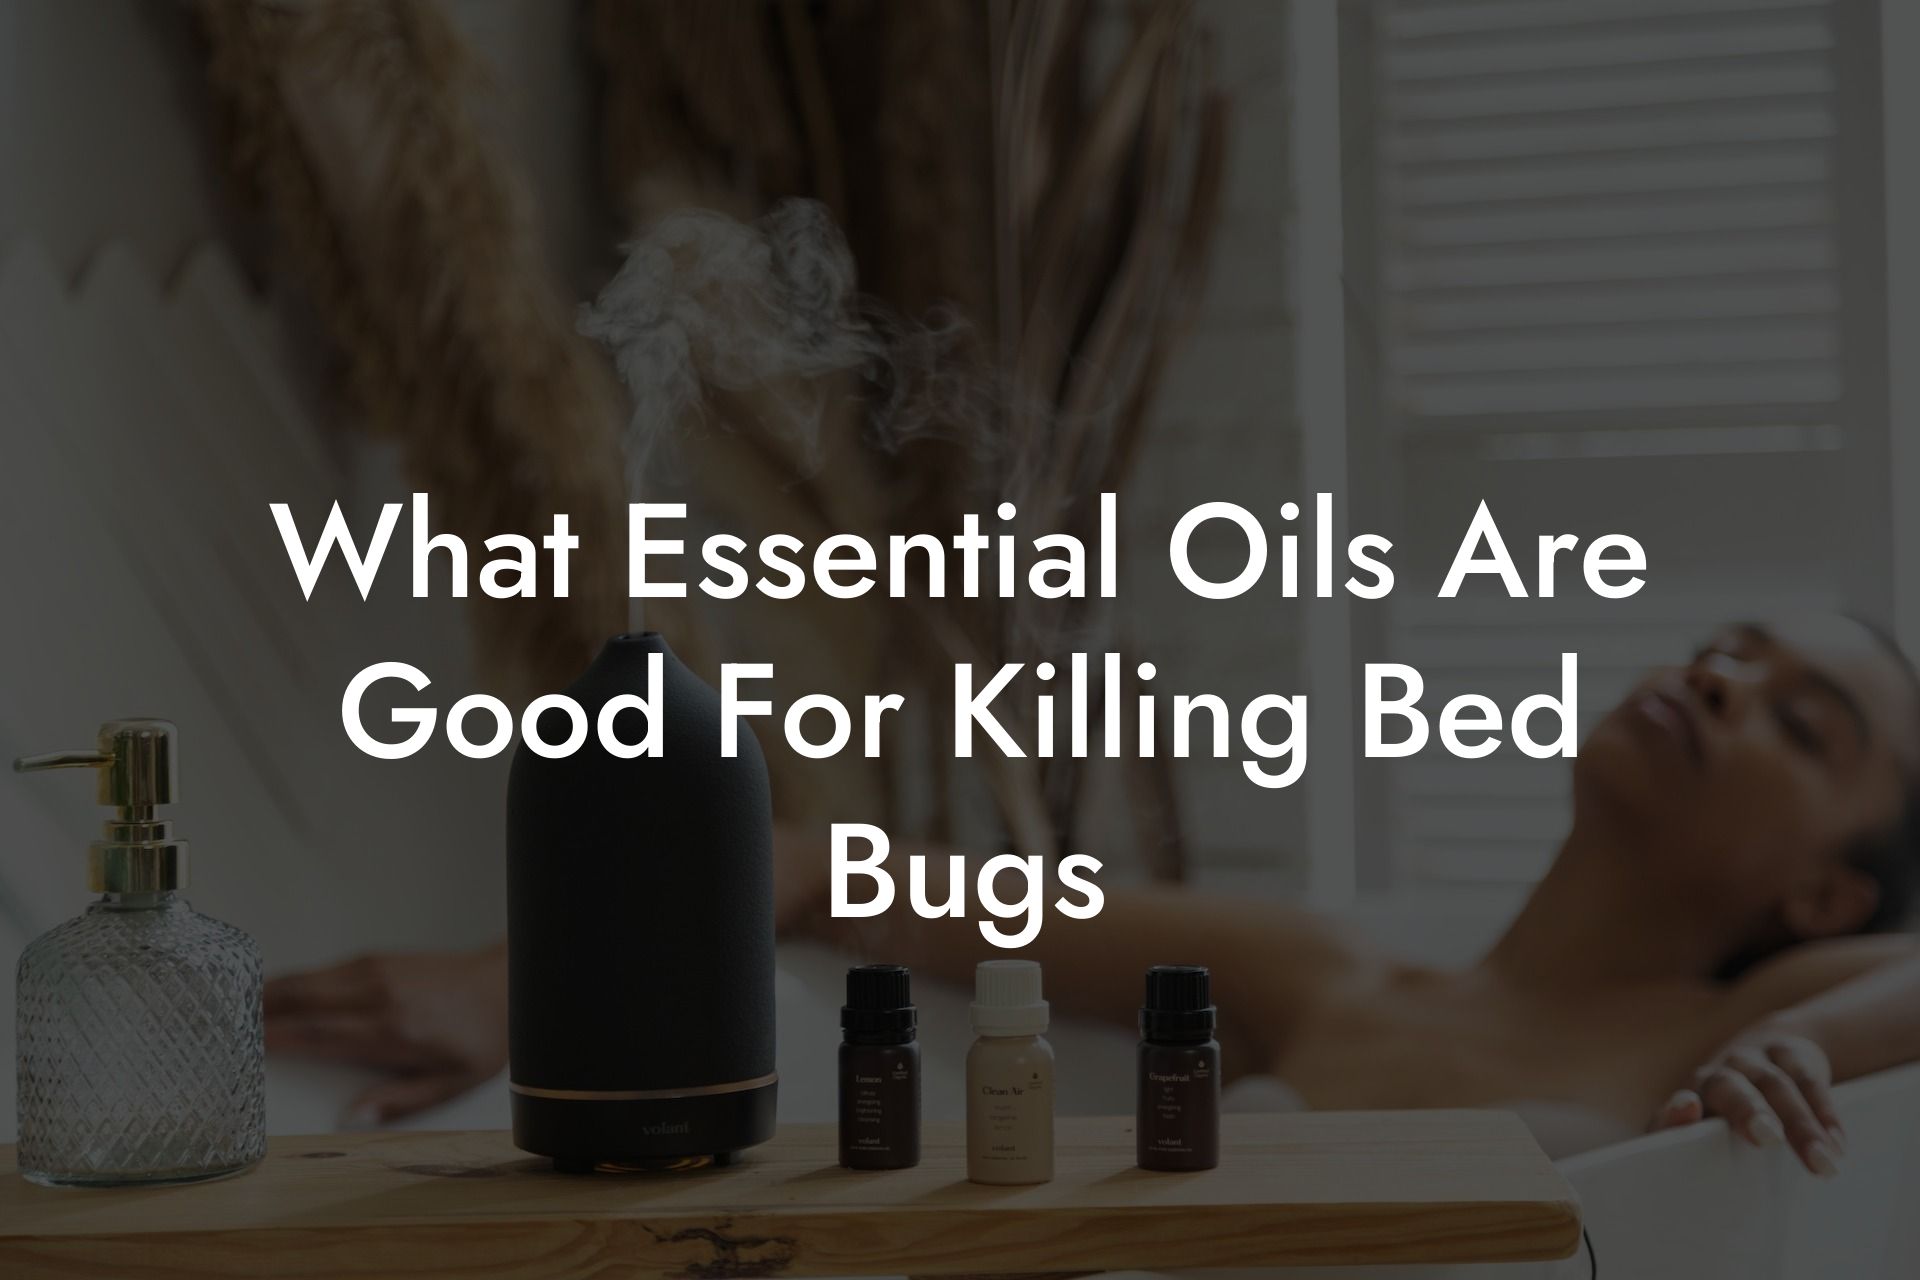 What Essential Oils Are Good For Killing Bed Bugs